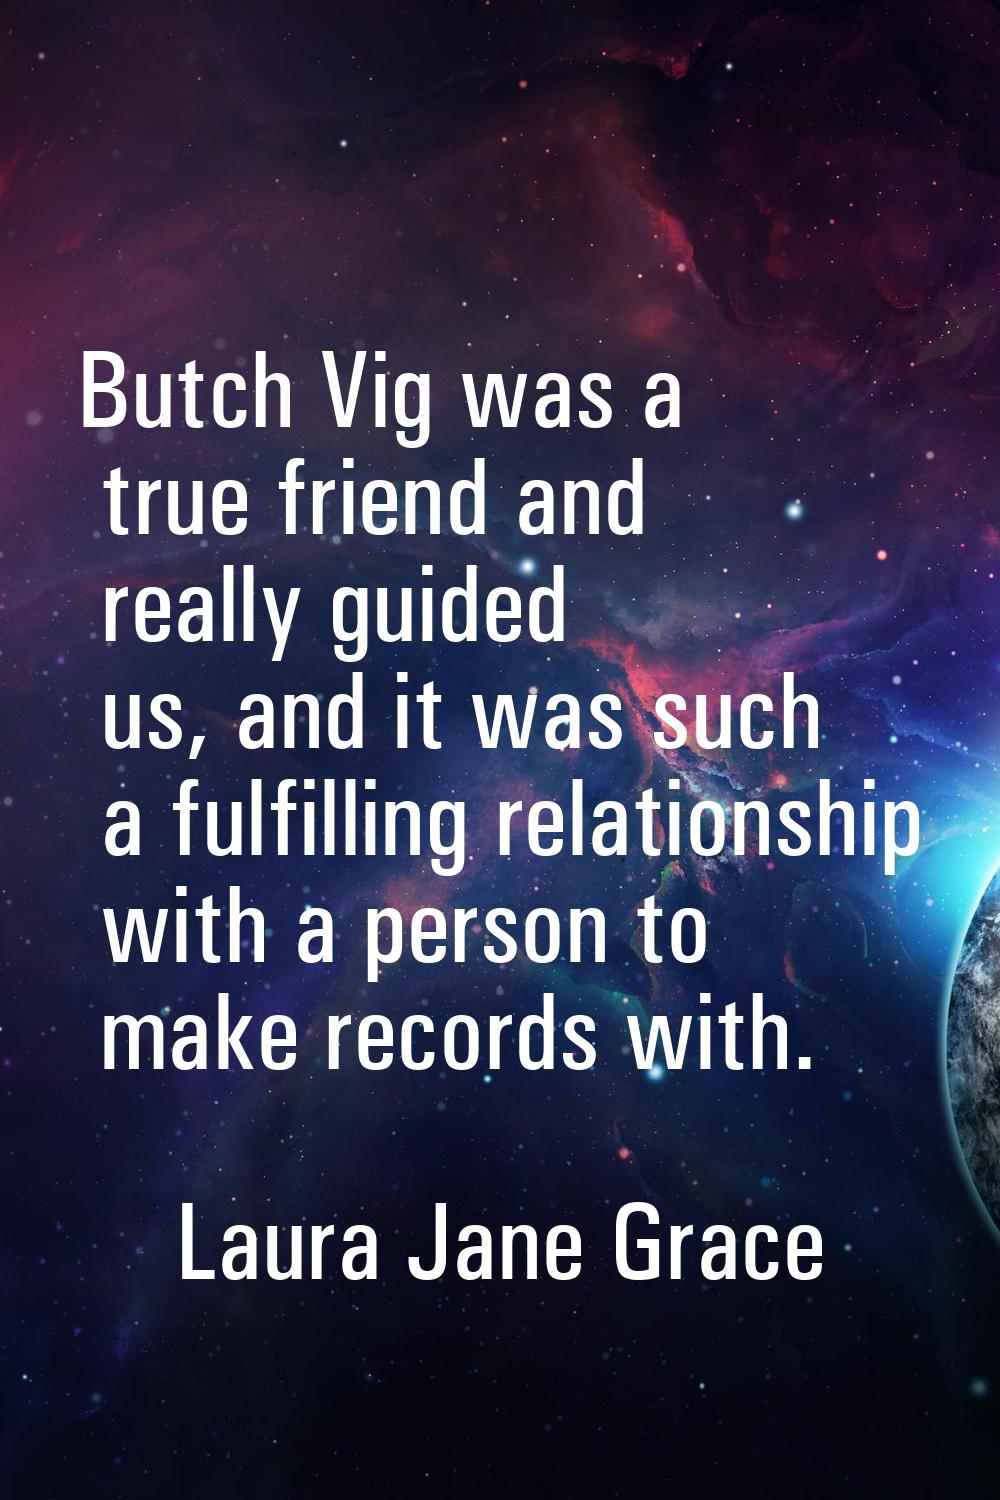 Butch Vig was a true friend and really guided us, and it was such a fulfilling relationship with a 